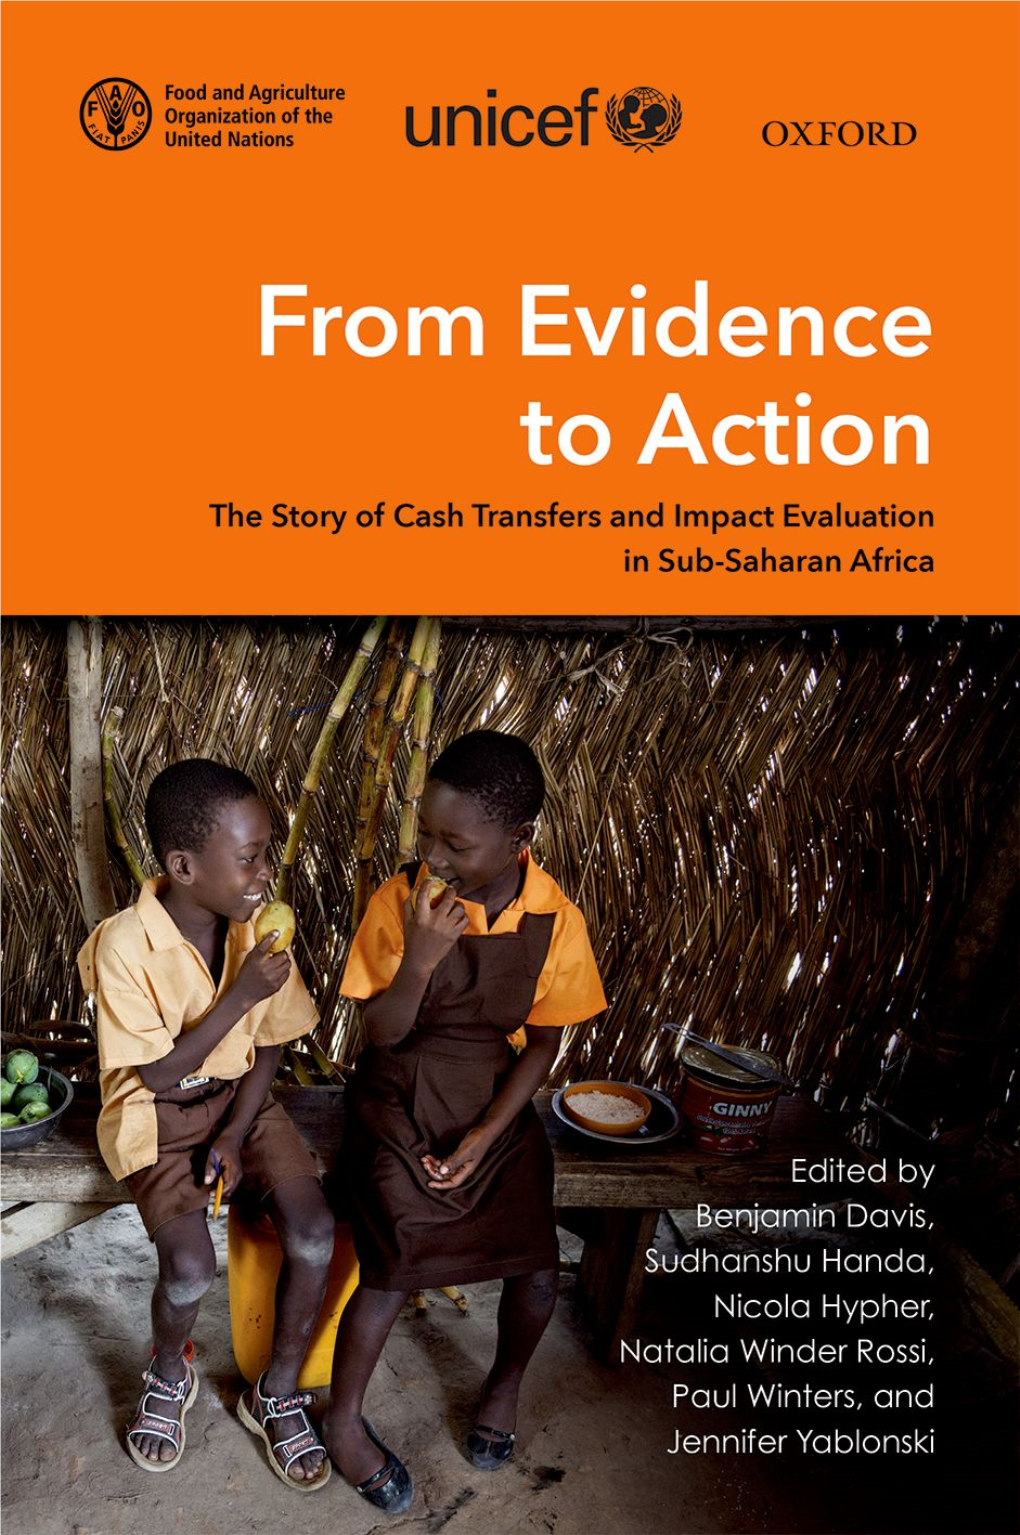 From Evidence: the Story of Cash Transfers and Impact Evaluation In